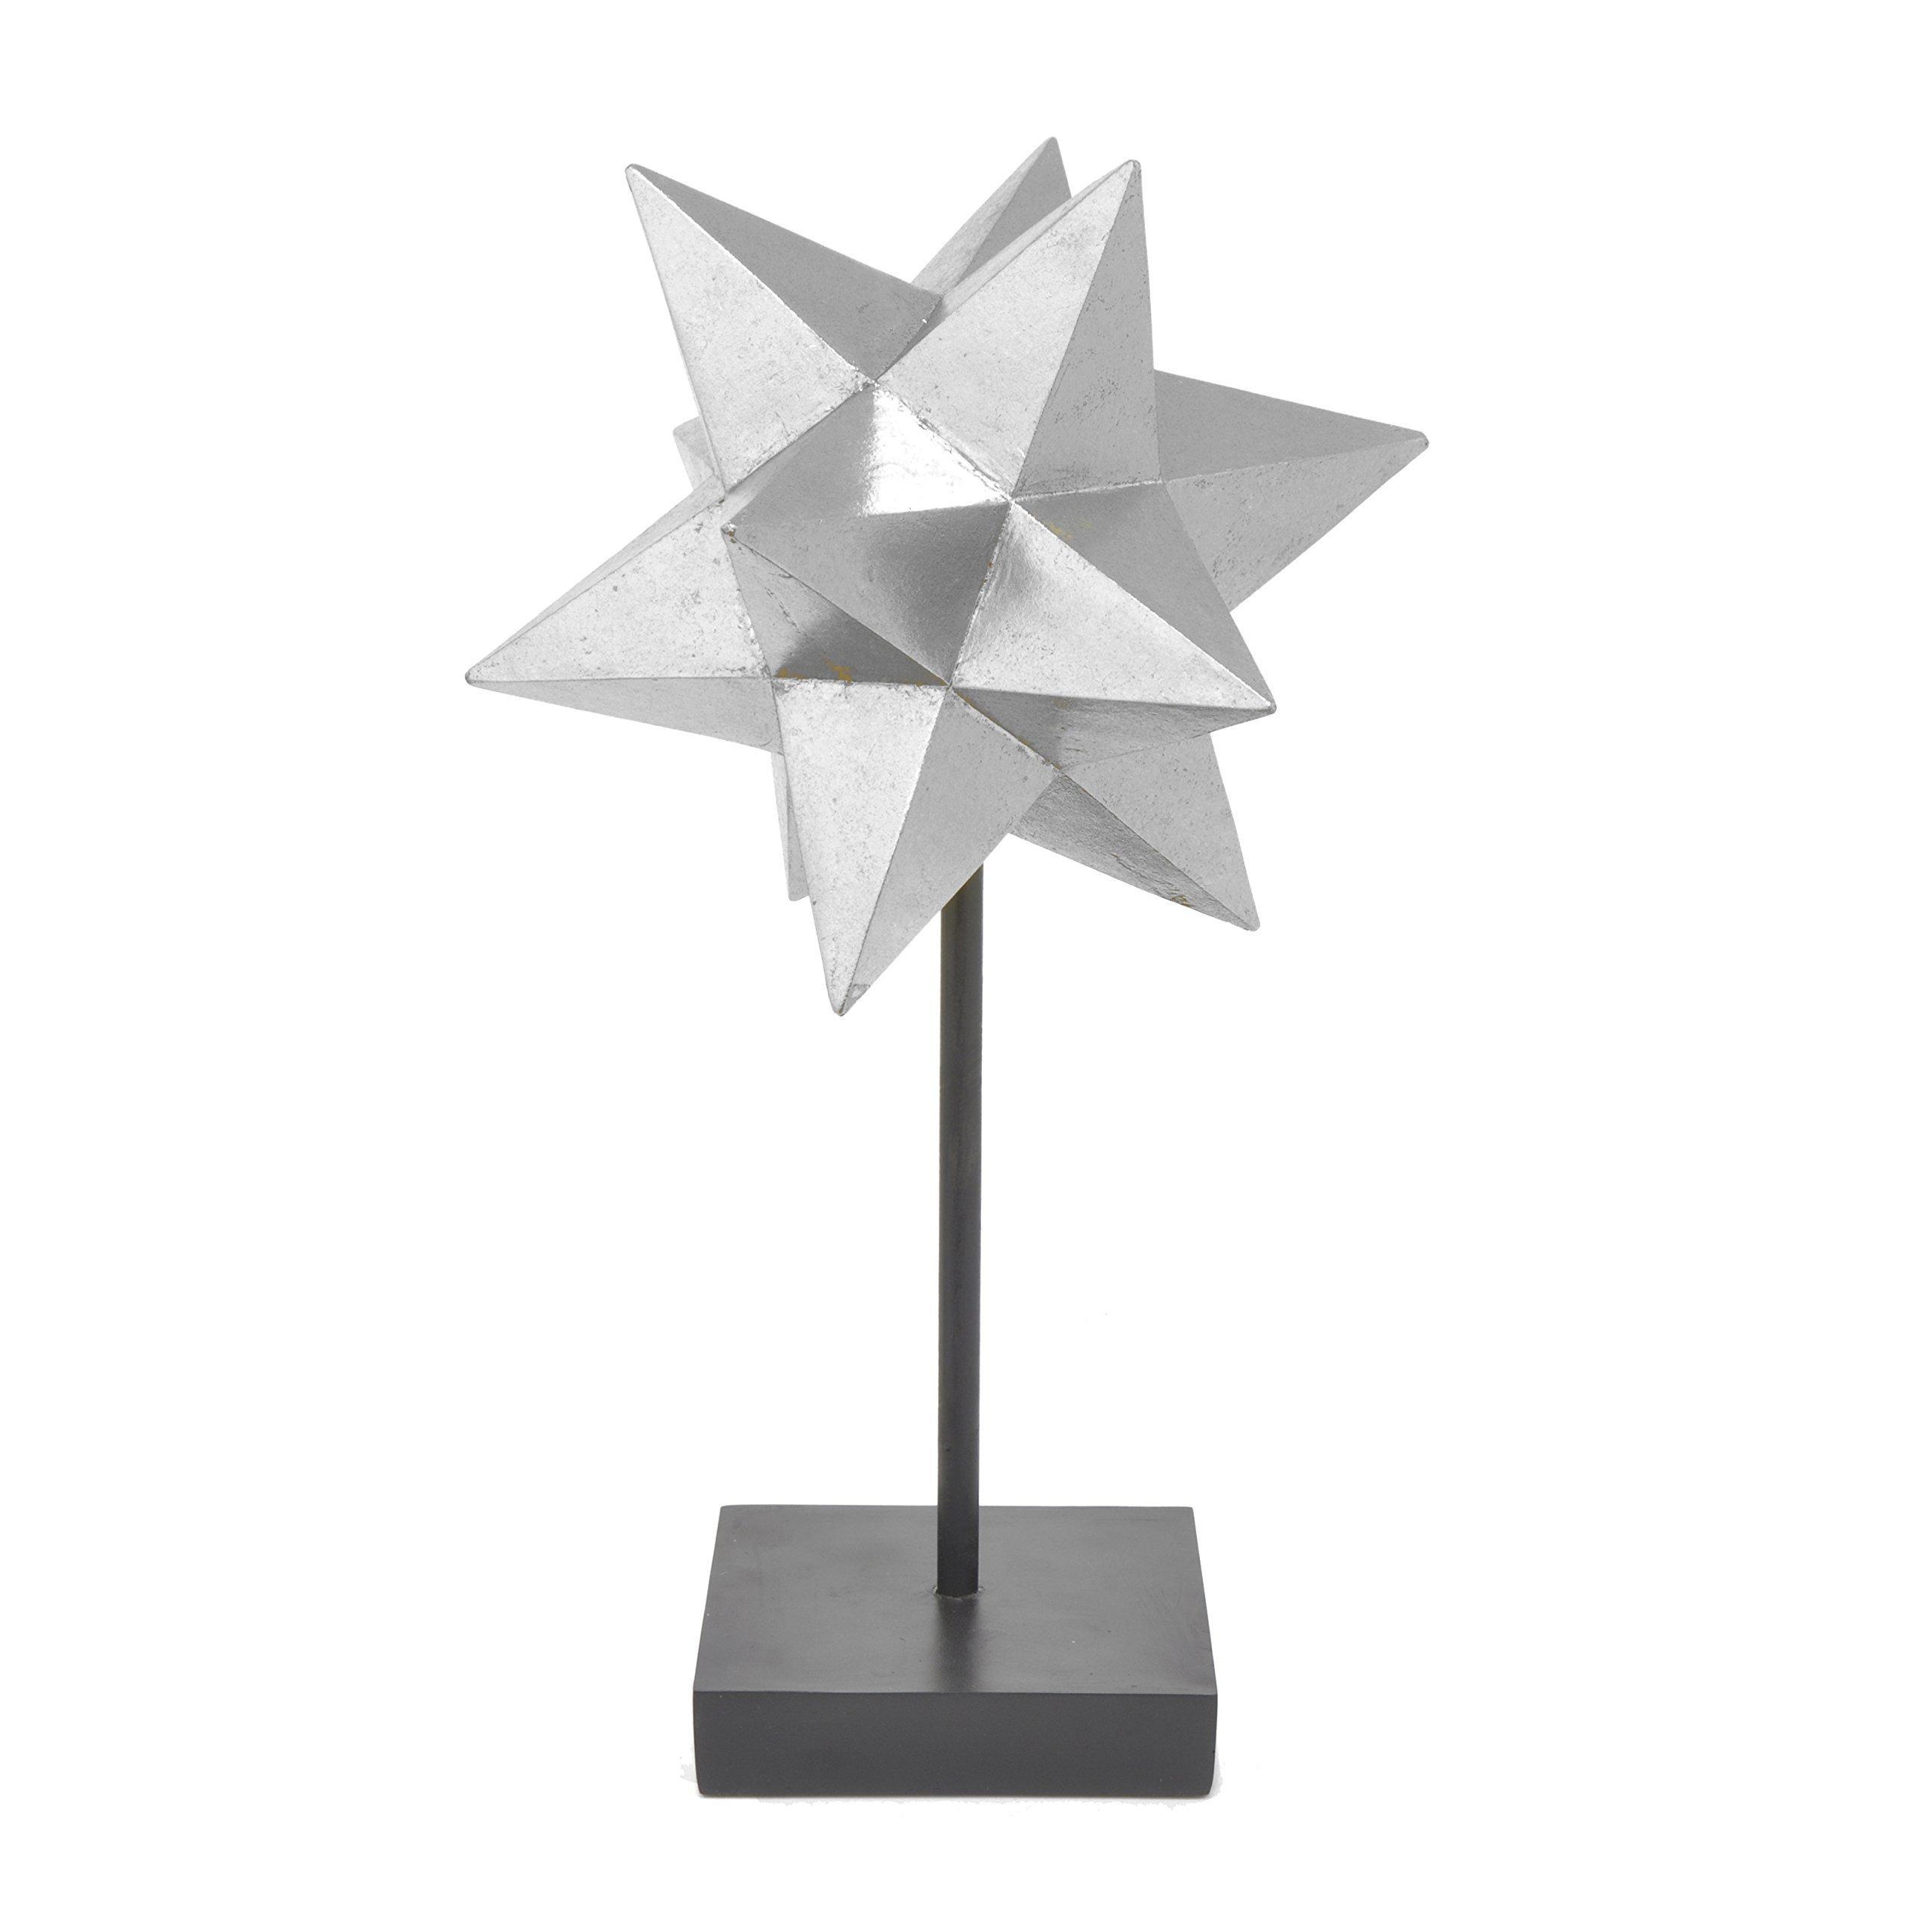 Three Hands Corporation 23885.0 Three Hands Resin Star Tabletop Decor & Stand -Silver Sm Three Hands Resin Star Tabletop Decor & Stand SM,Silver,Med